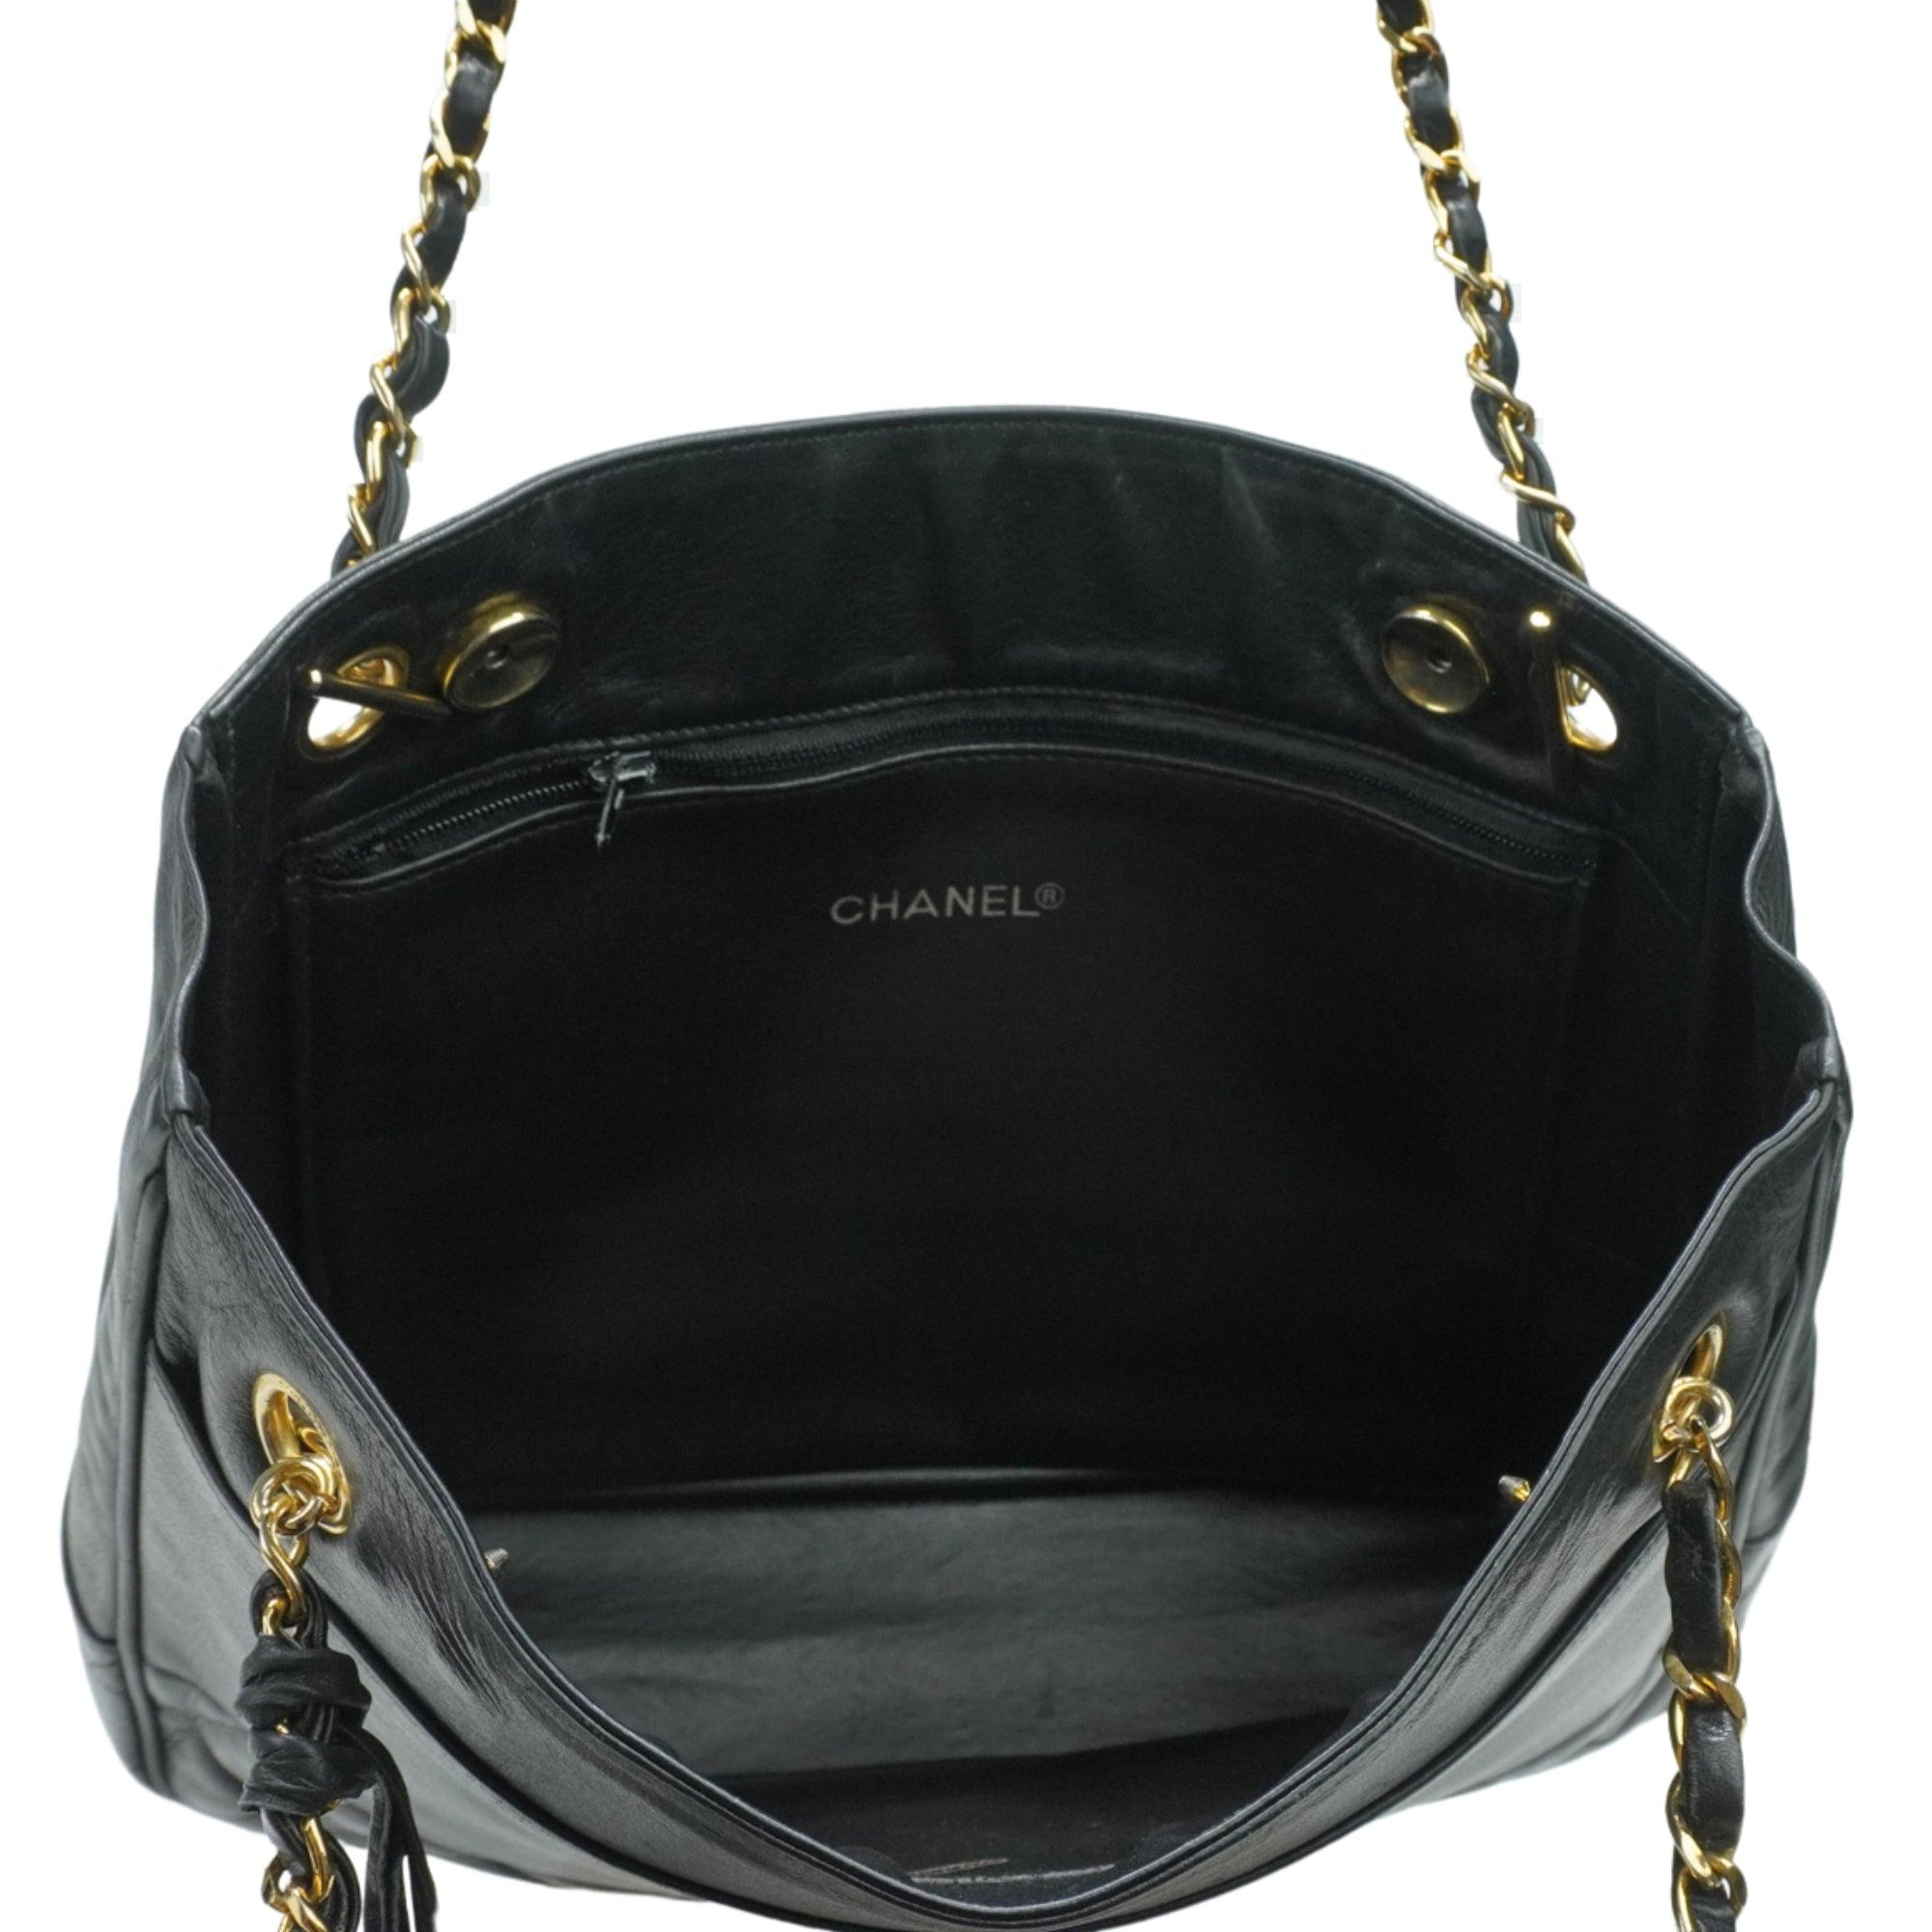 Chanel 'Shopping' Tote - Fashionably Yours